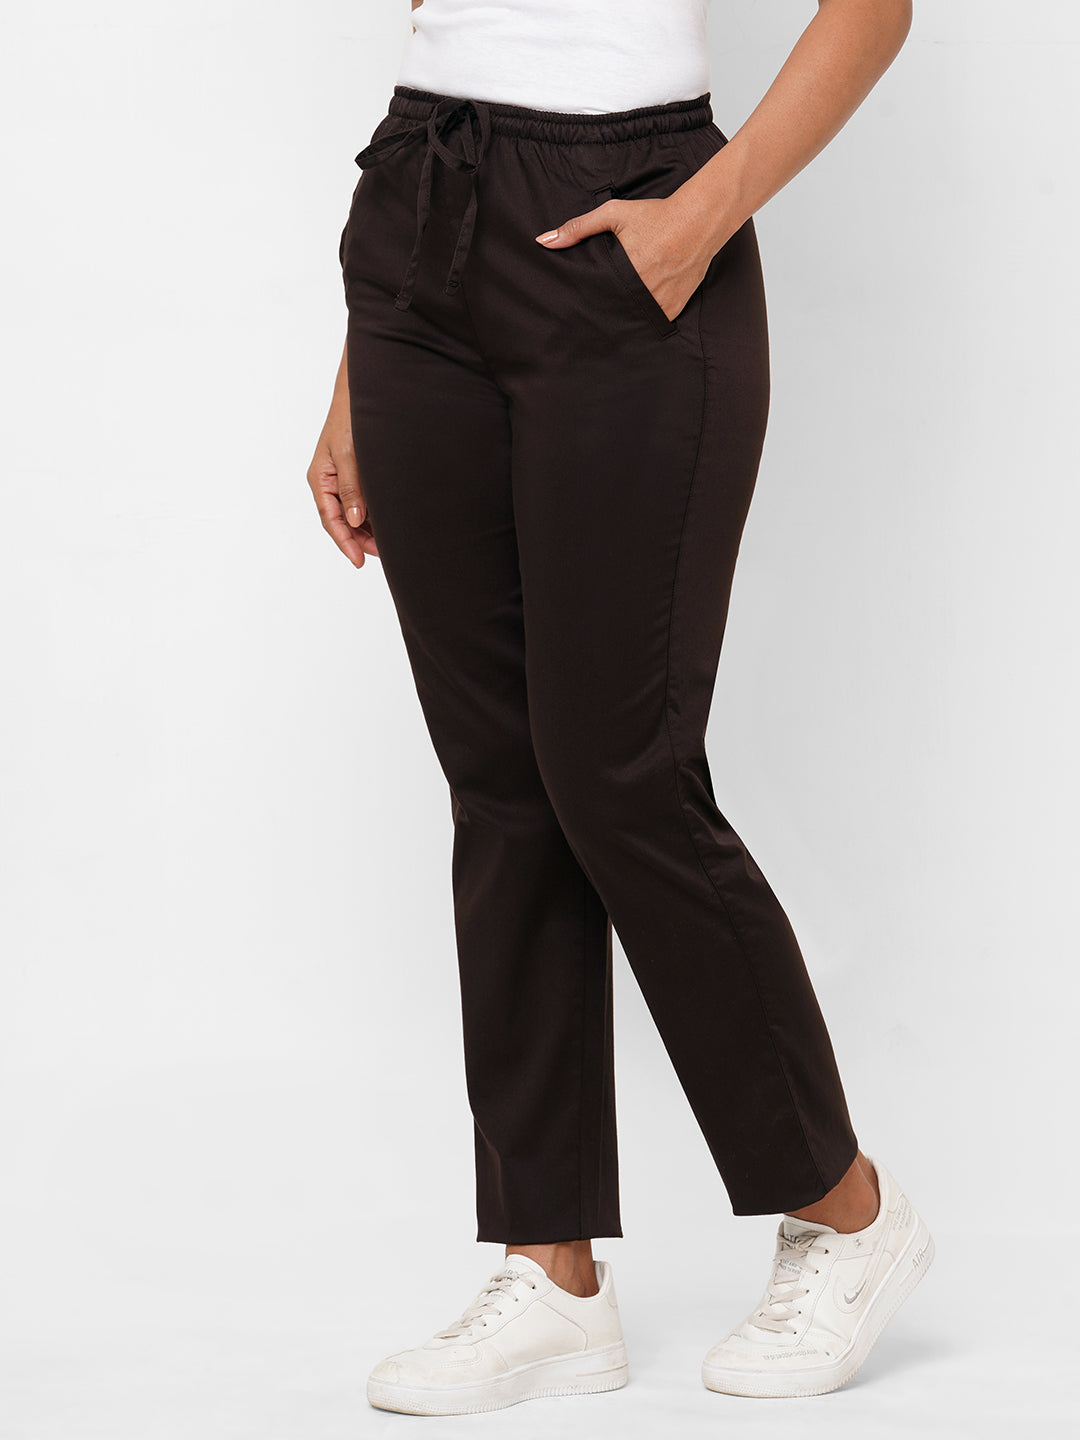 Cotton Spandex 26 Beige Trousers in Hyderabad - Dealers, Manufacturers &  Suppliers - Justdial